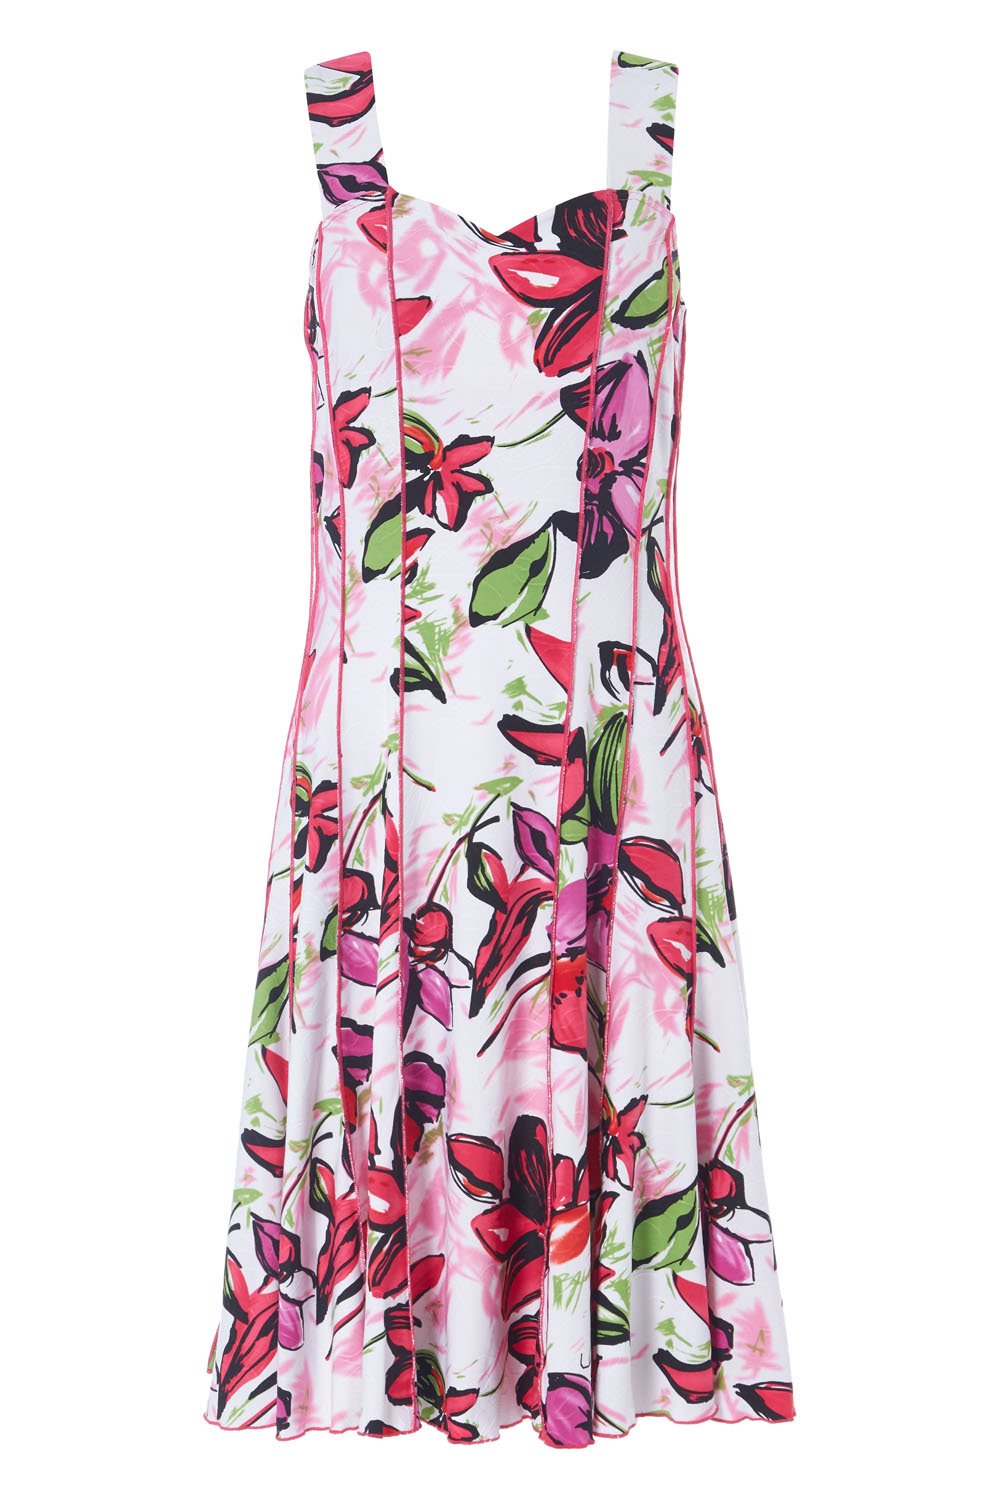 Floral Print Panel Fit and Flare Dress in Pink - Roman Originals UK